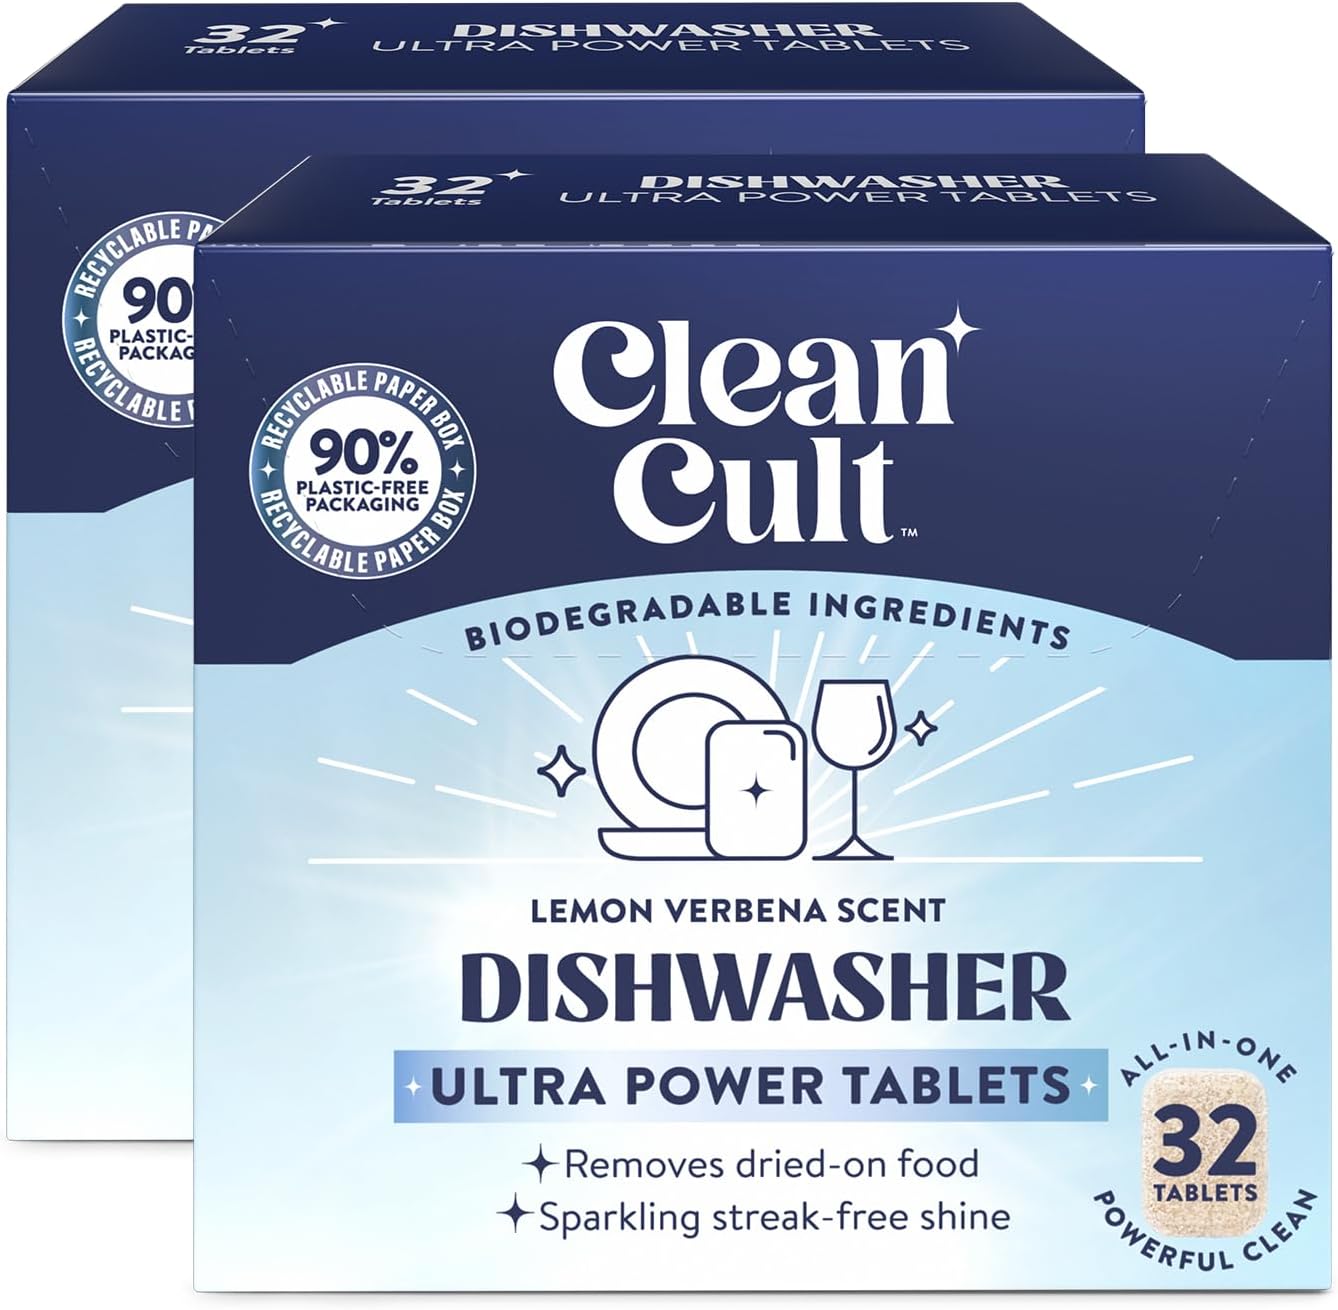 Cleancult Ultra Power Dishwasher Detergent Tablets for Sparkling Streak-Free Shine, All-In-One, Less Plastic Waste, 64 Count